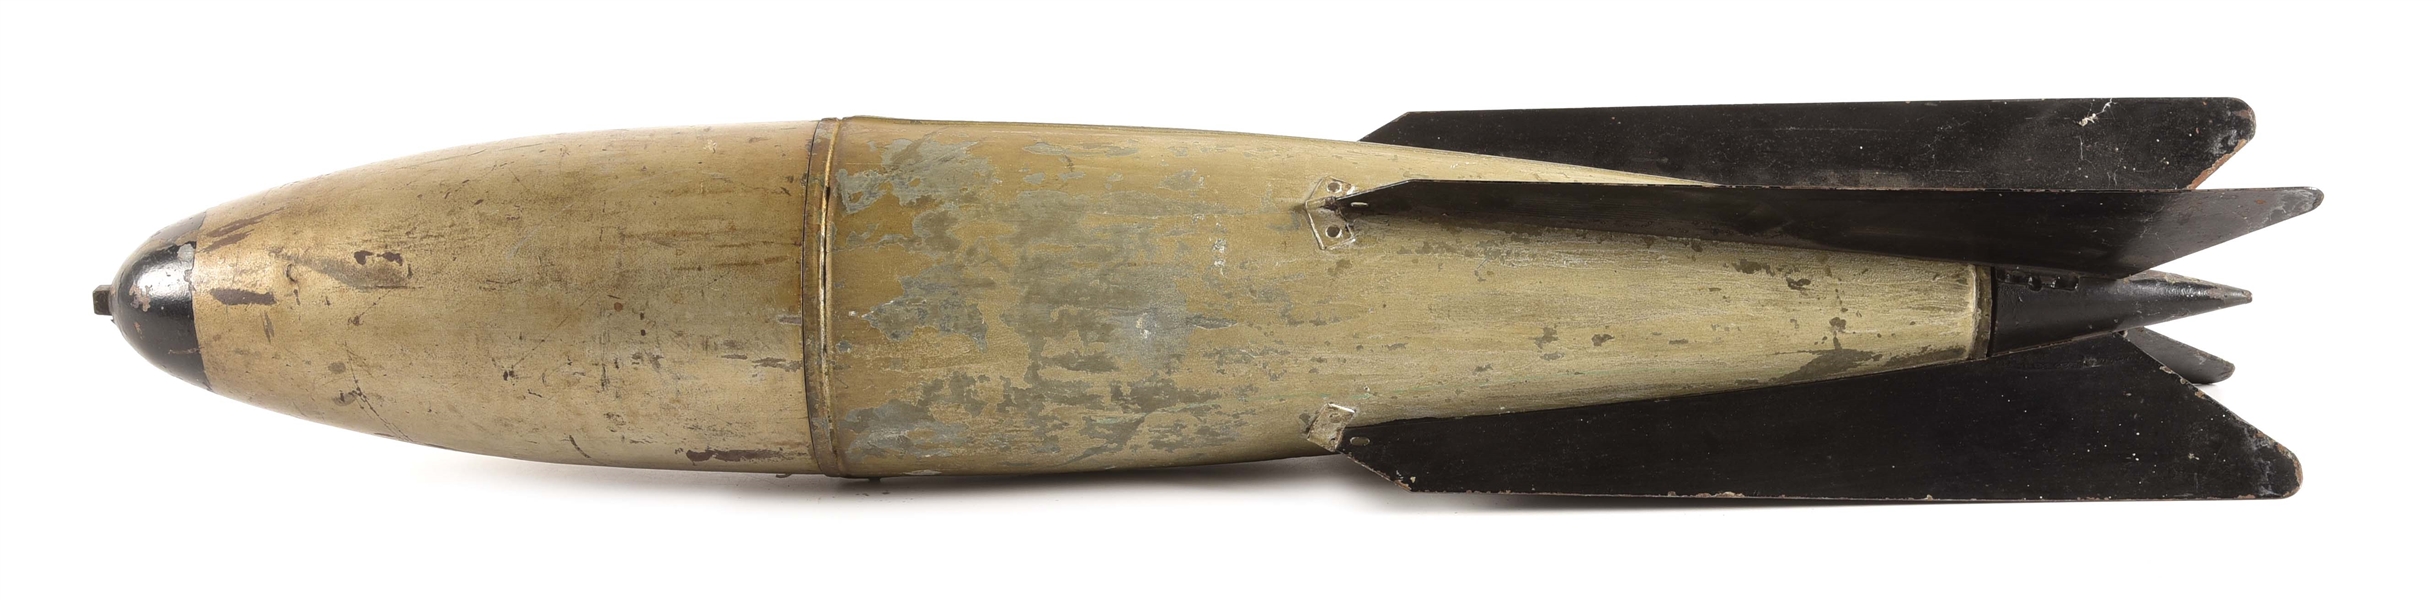 MKII BOMB ATTRIBUTED TO AVIATOR CHARLES LINDBERGH FROM THE RENOWNED COLLECTION OF HIS FRIEND JOHN K. LATTIMER.